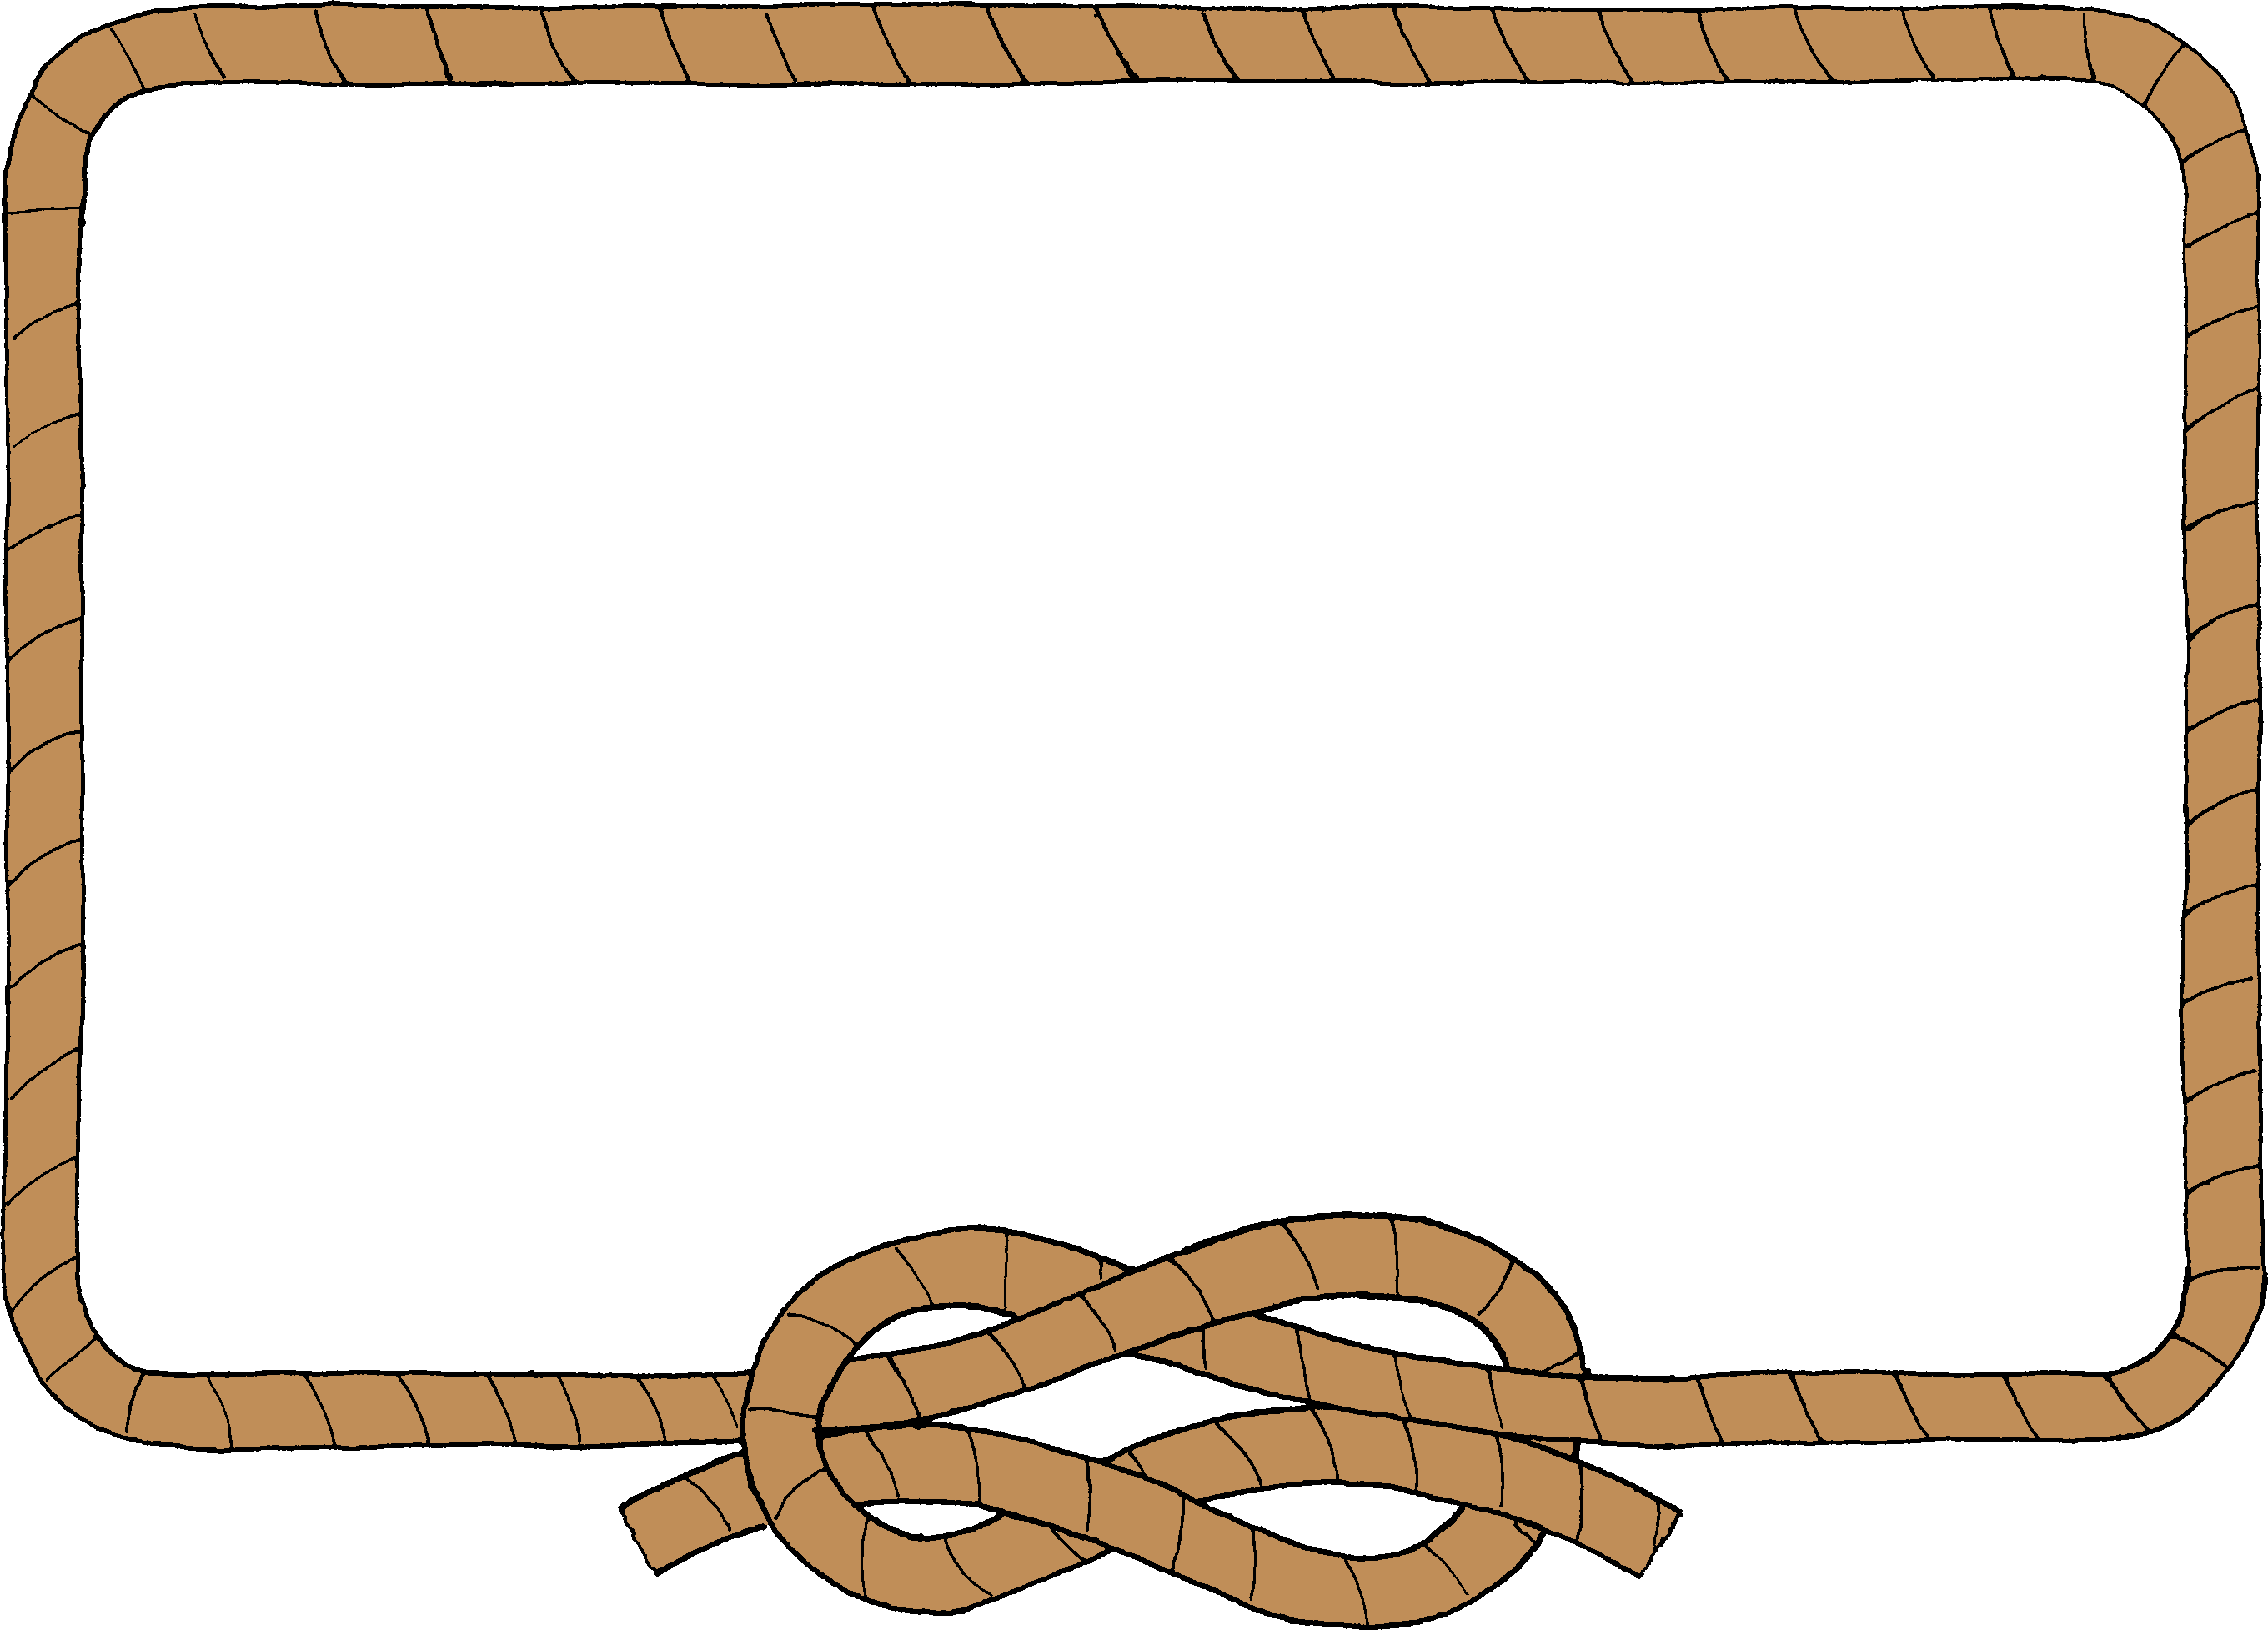 rope frame clipart - photo #3